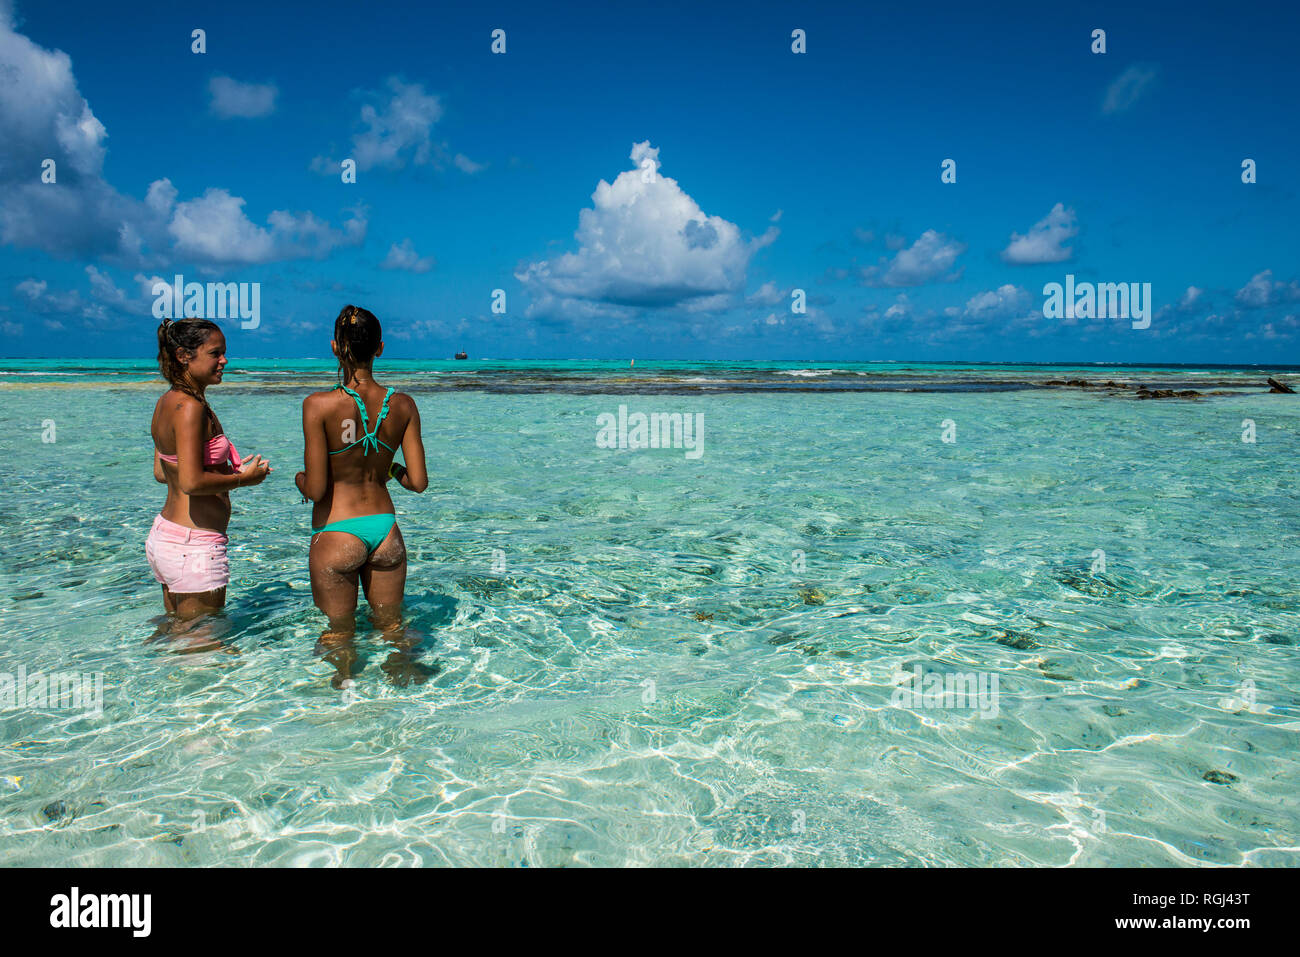 Carribean, Colombia, San Andres, El Acuario, two women standing in shallow turquoise water Stock Photo